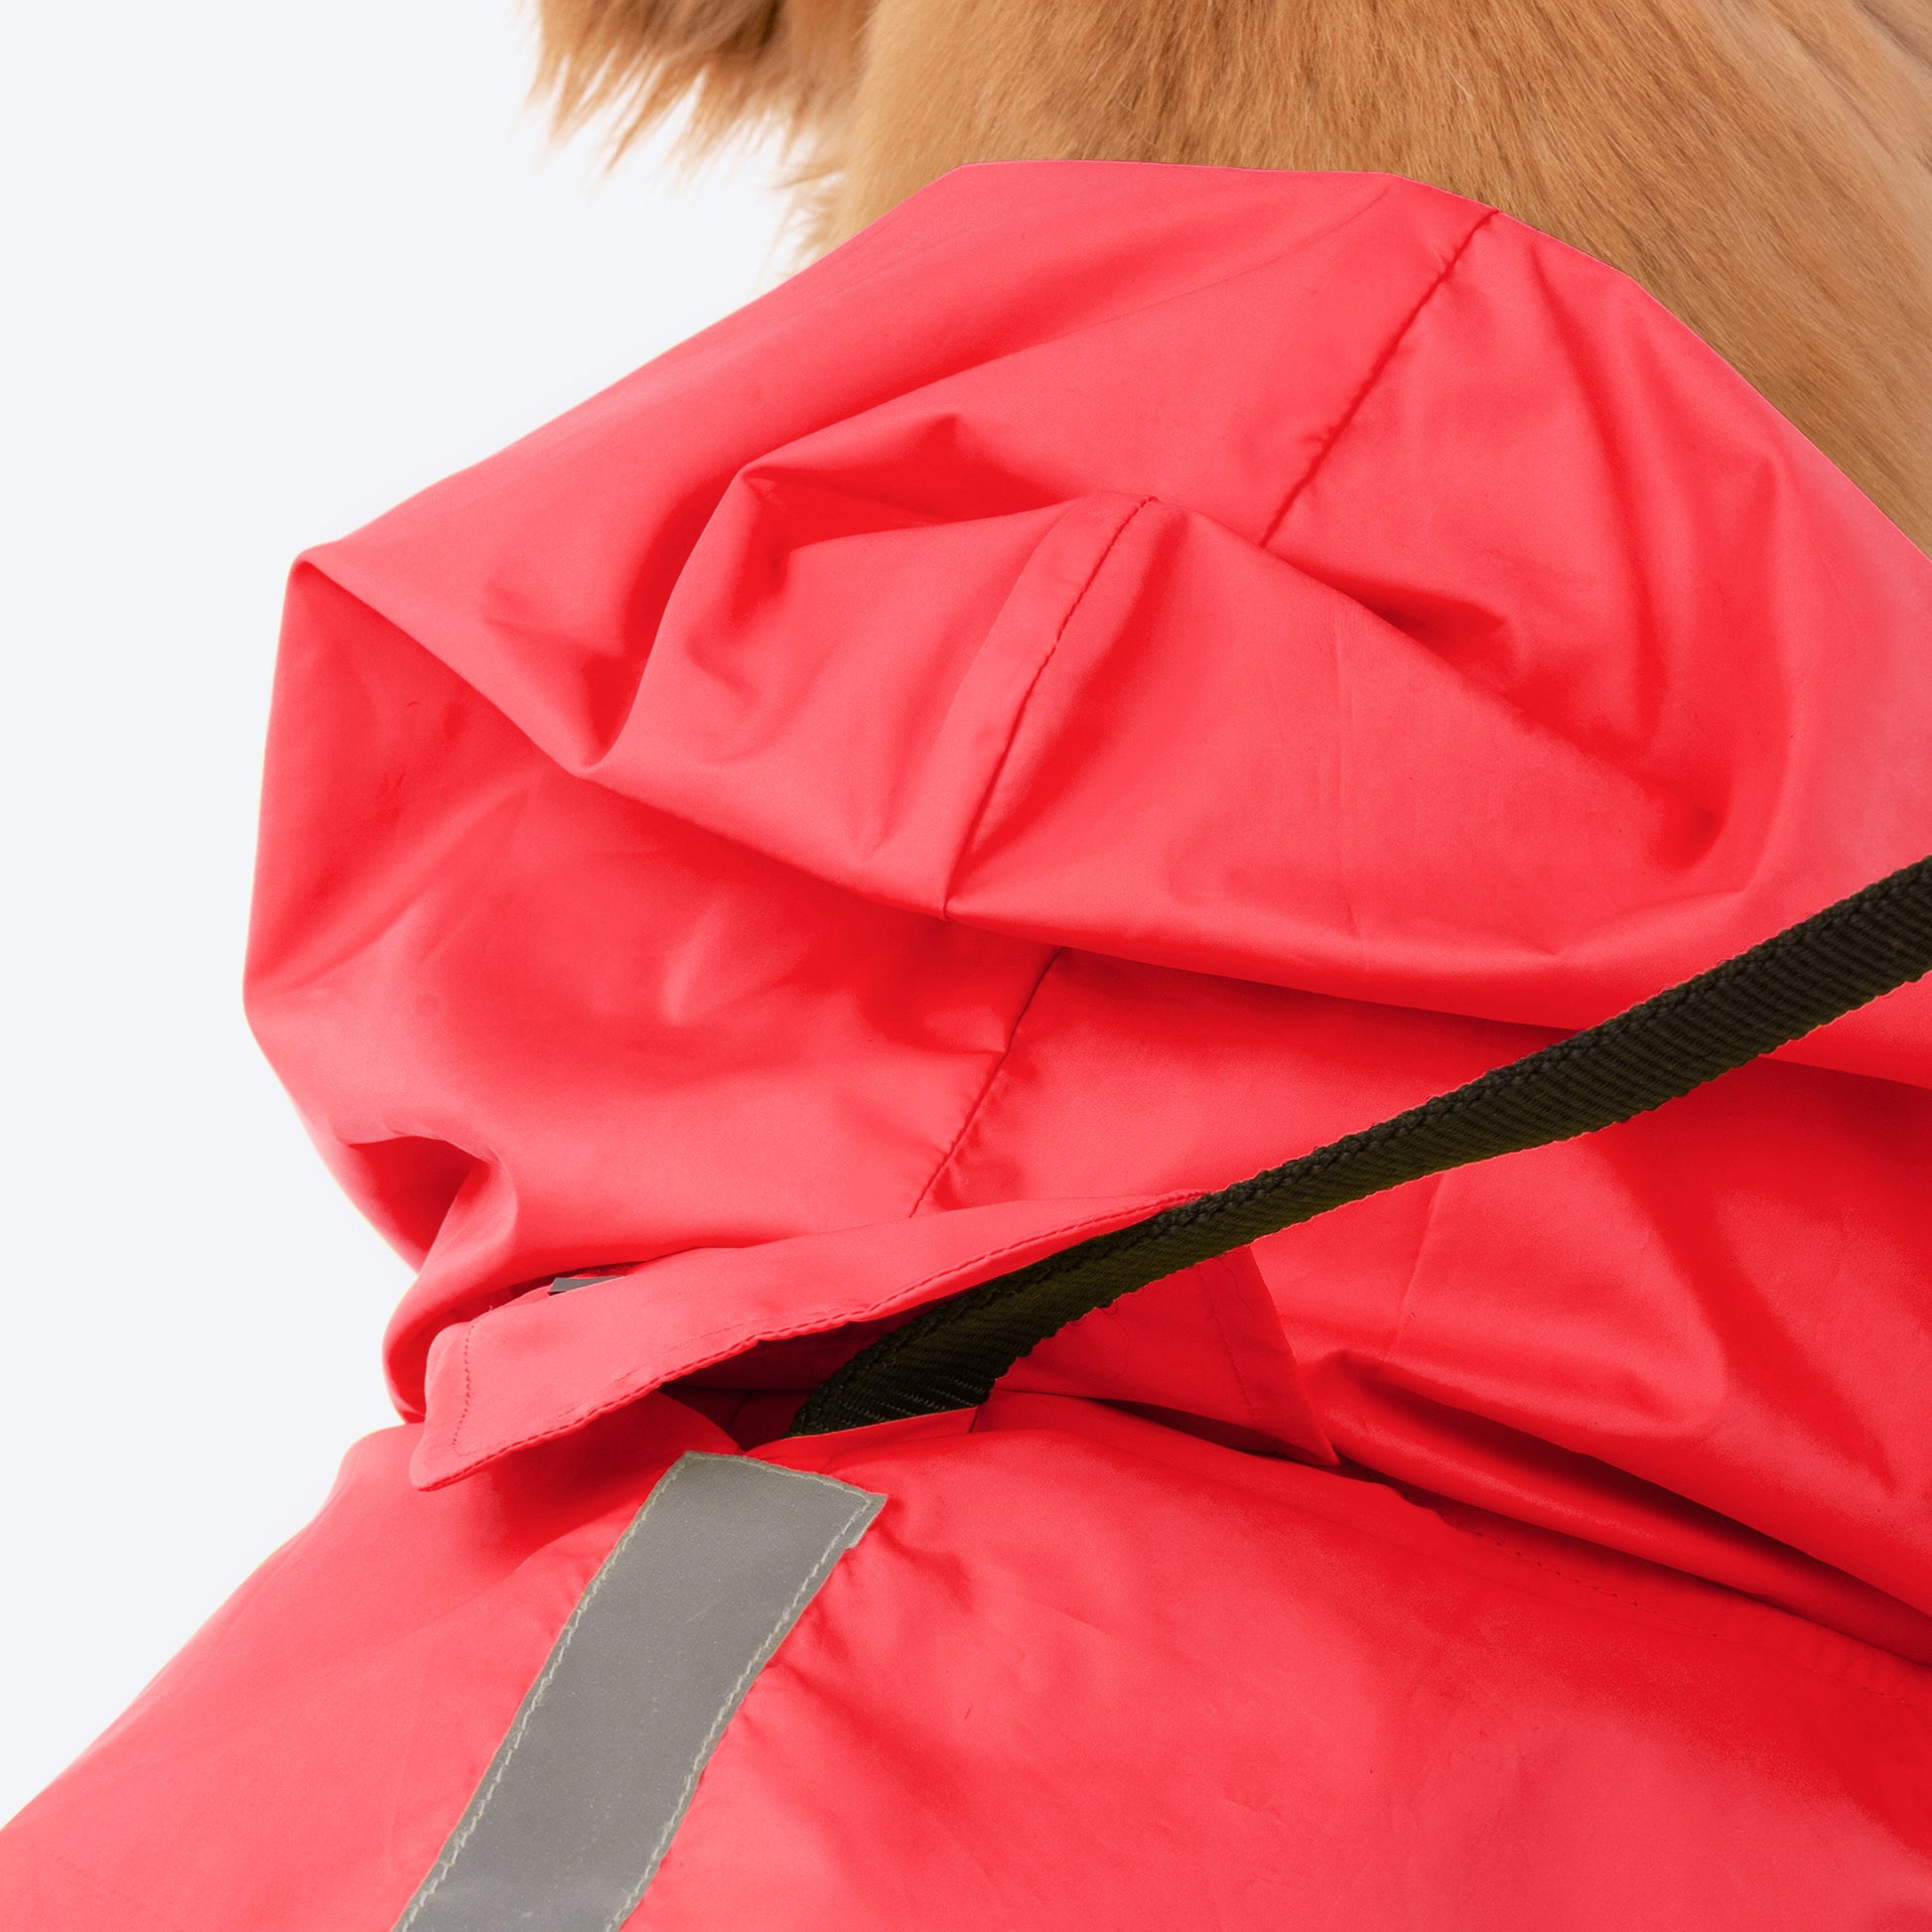 HUFT Magical Mist Dog Raincoat - Red - Heads Up For Tails